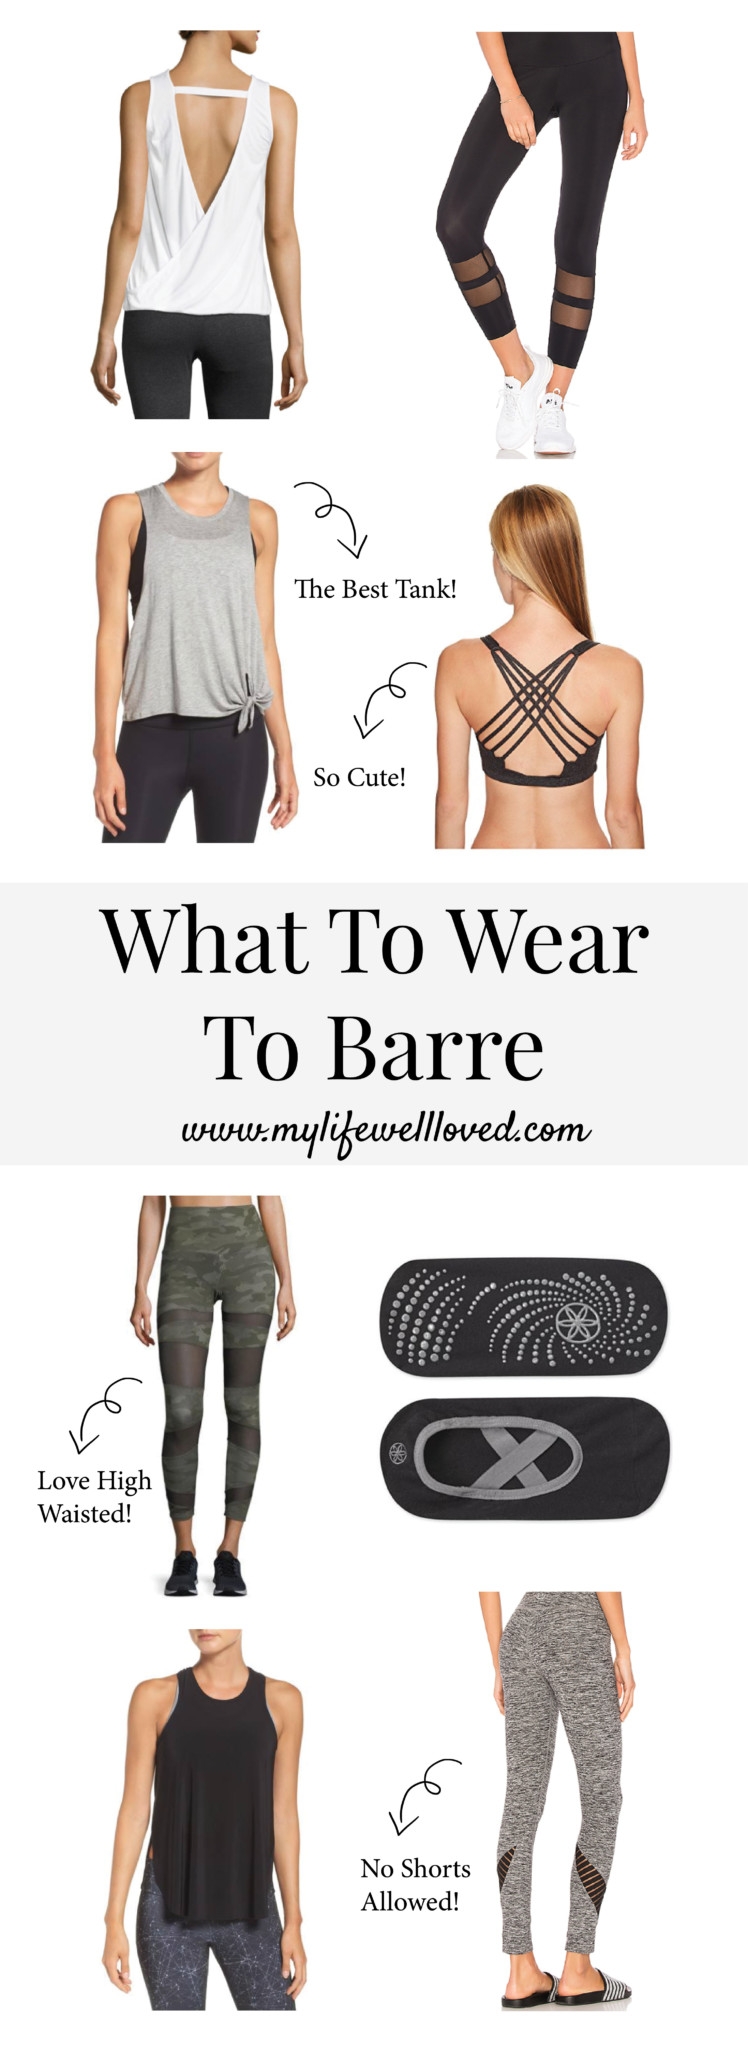 comment for links to all of these outfits!! 💅🏻 My Barre